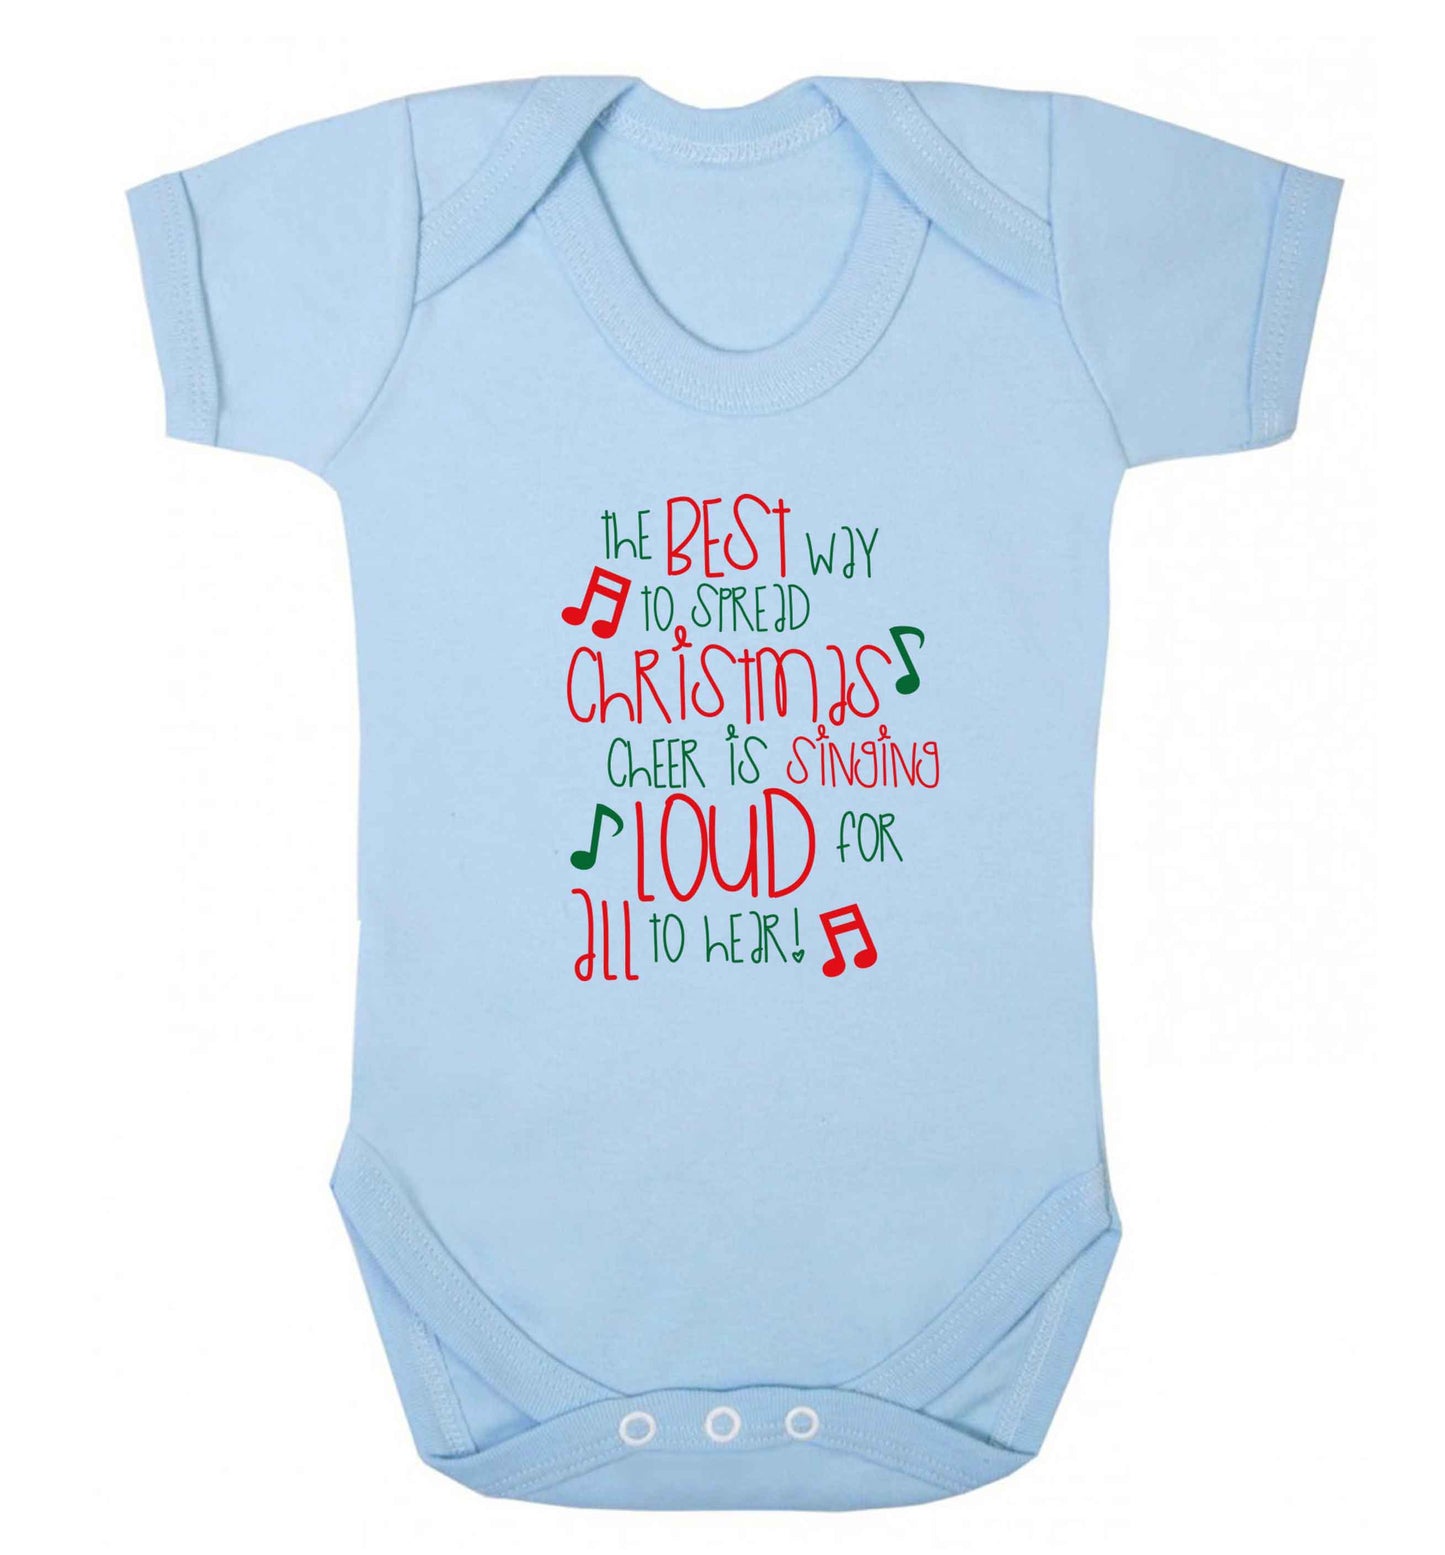 The best way to spread Christmas cheer is singing loud for all to hear baby vest pale blue 18-24 months